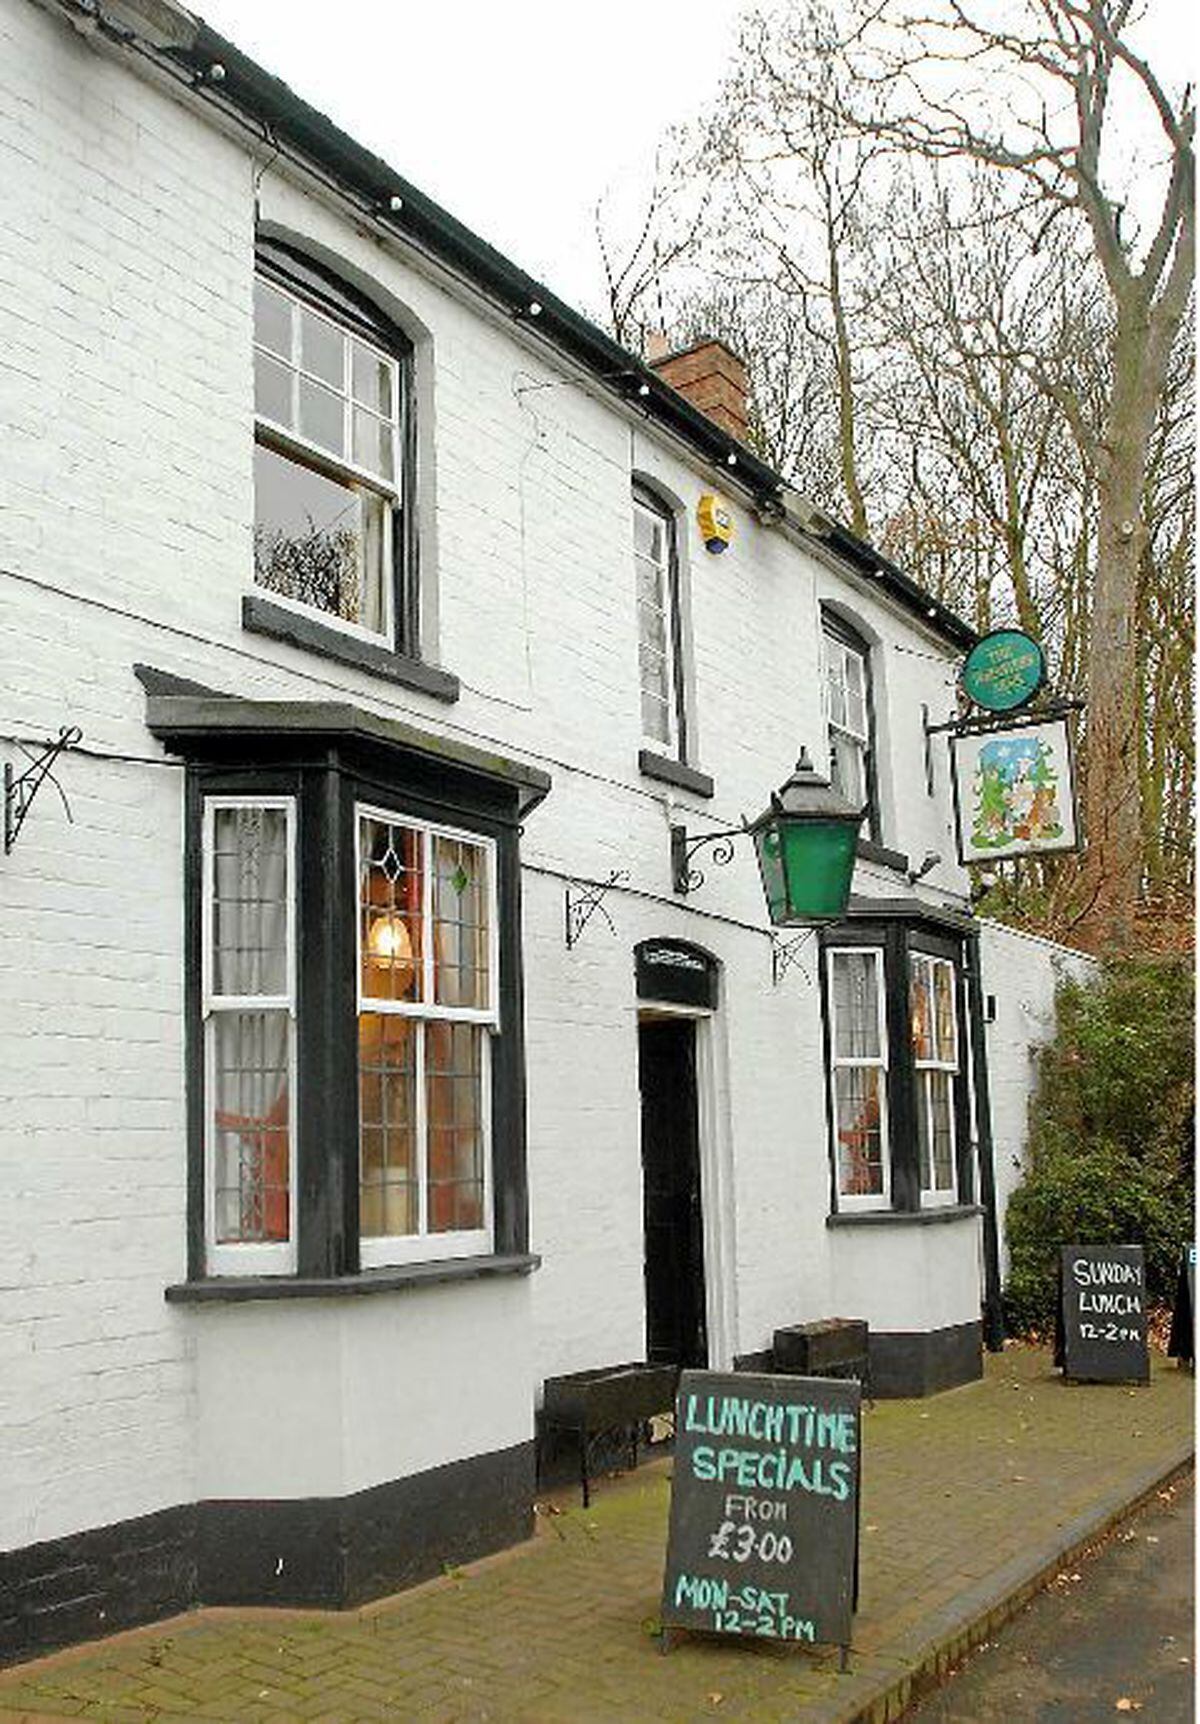 The Foresters Arms in Wollaston is great for hikers, according to the book